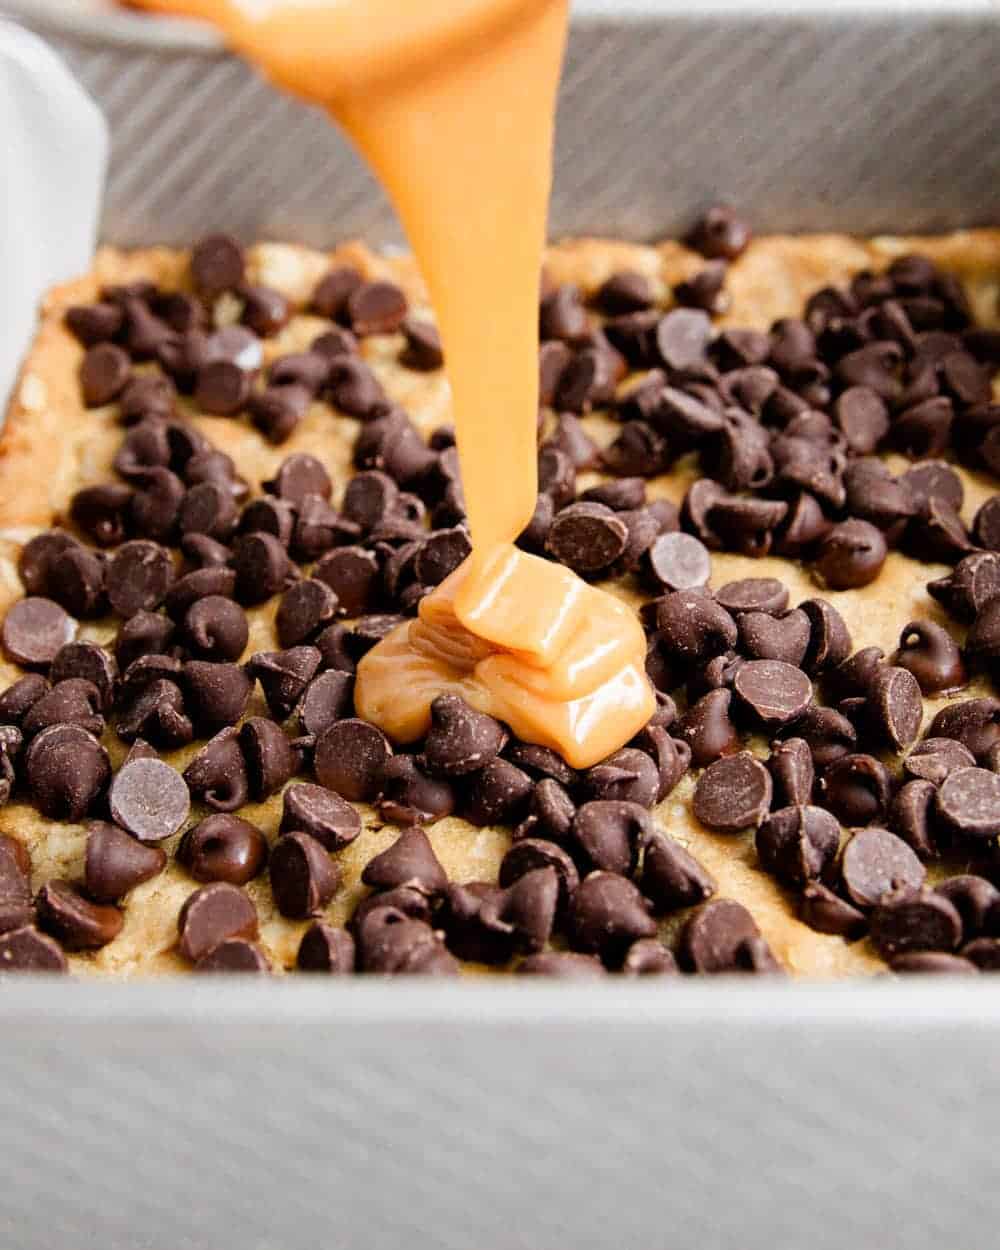 Pouring caramel on top of oatmeal bars with chocolate chips.